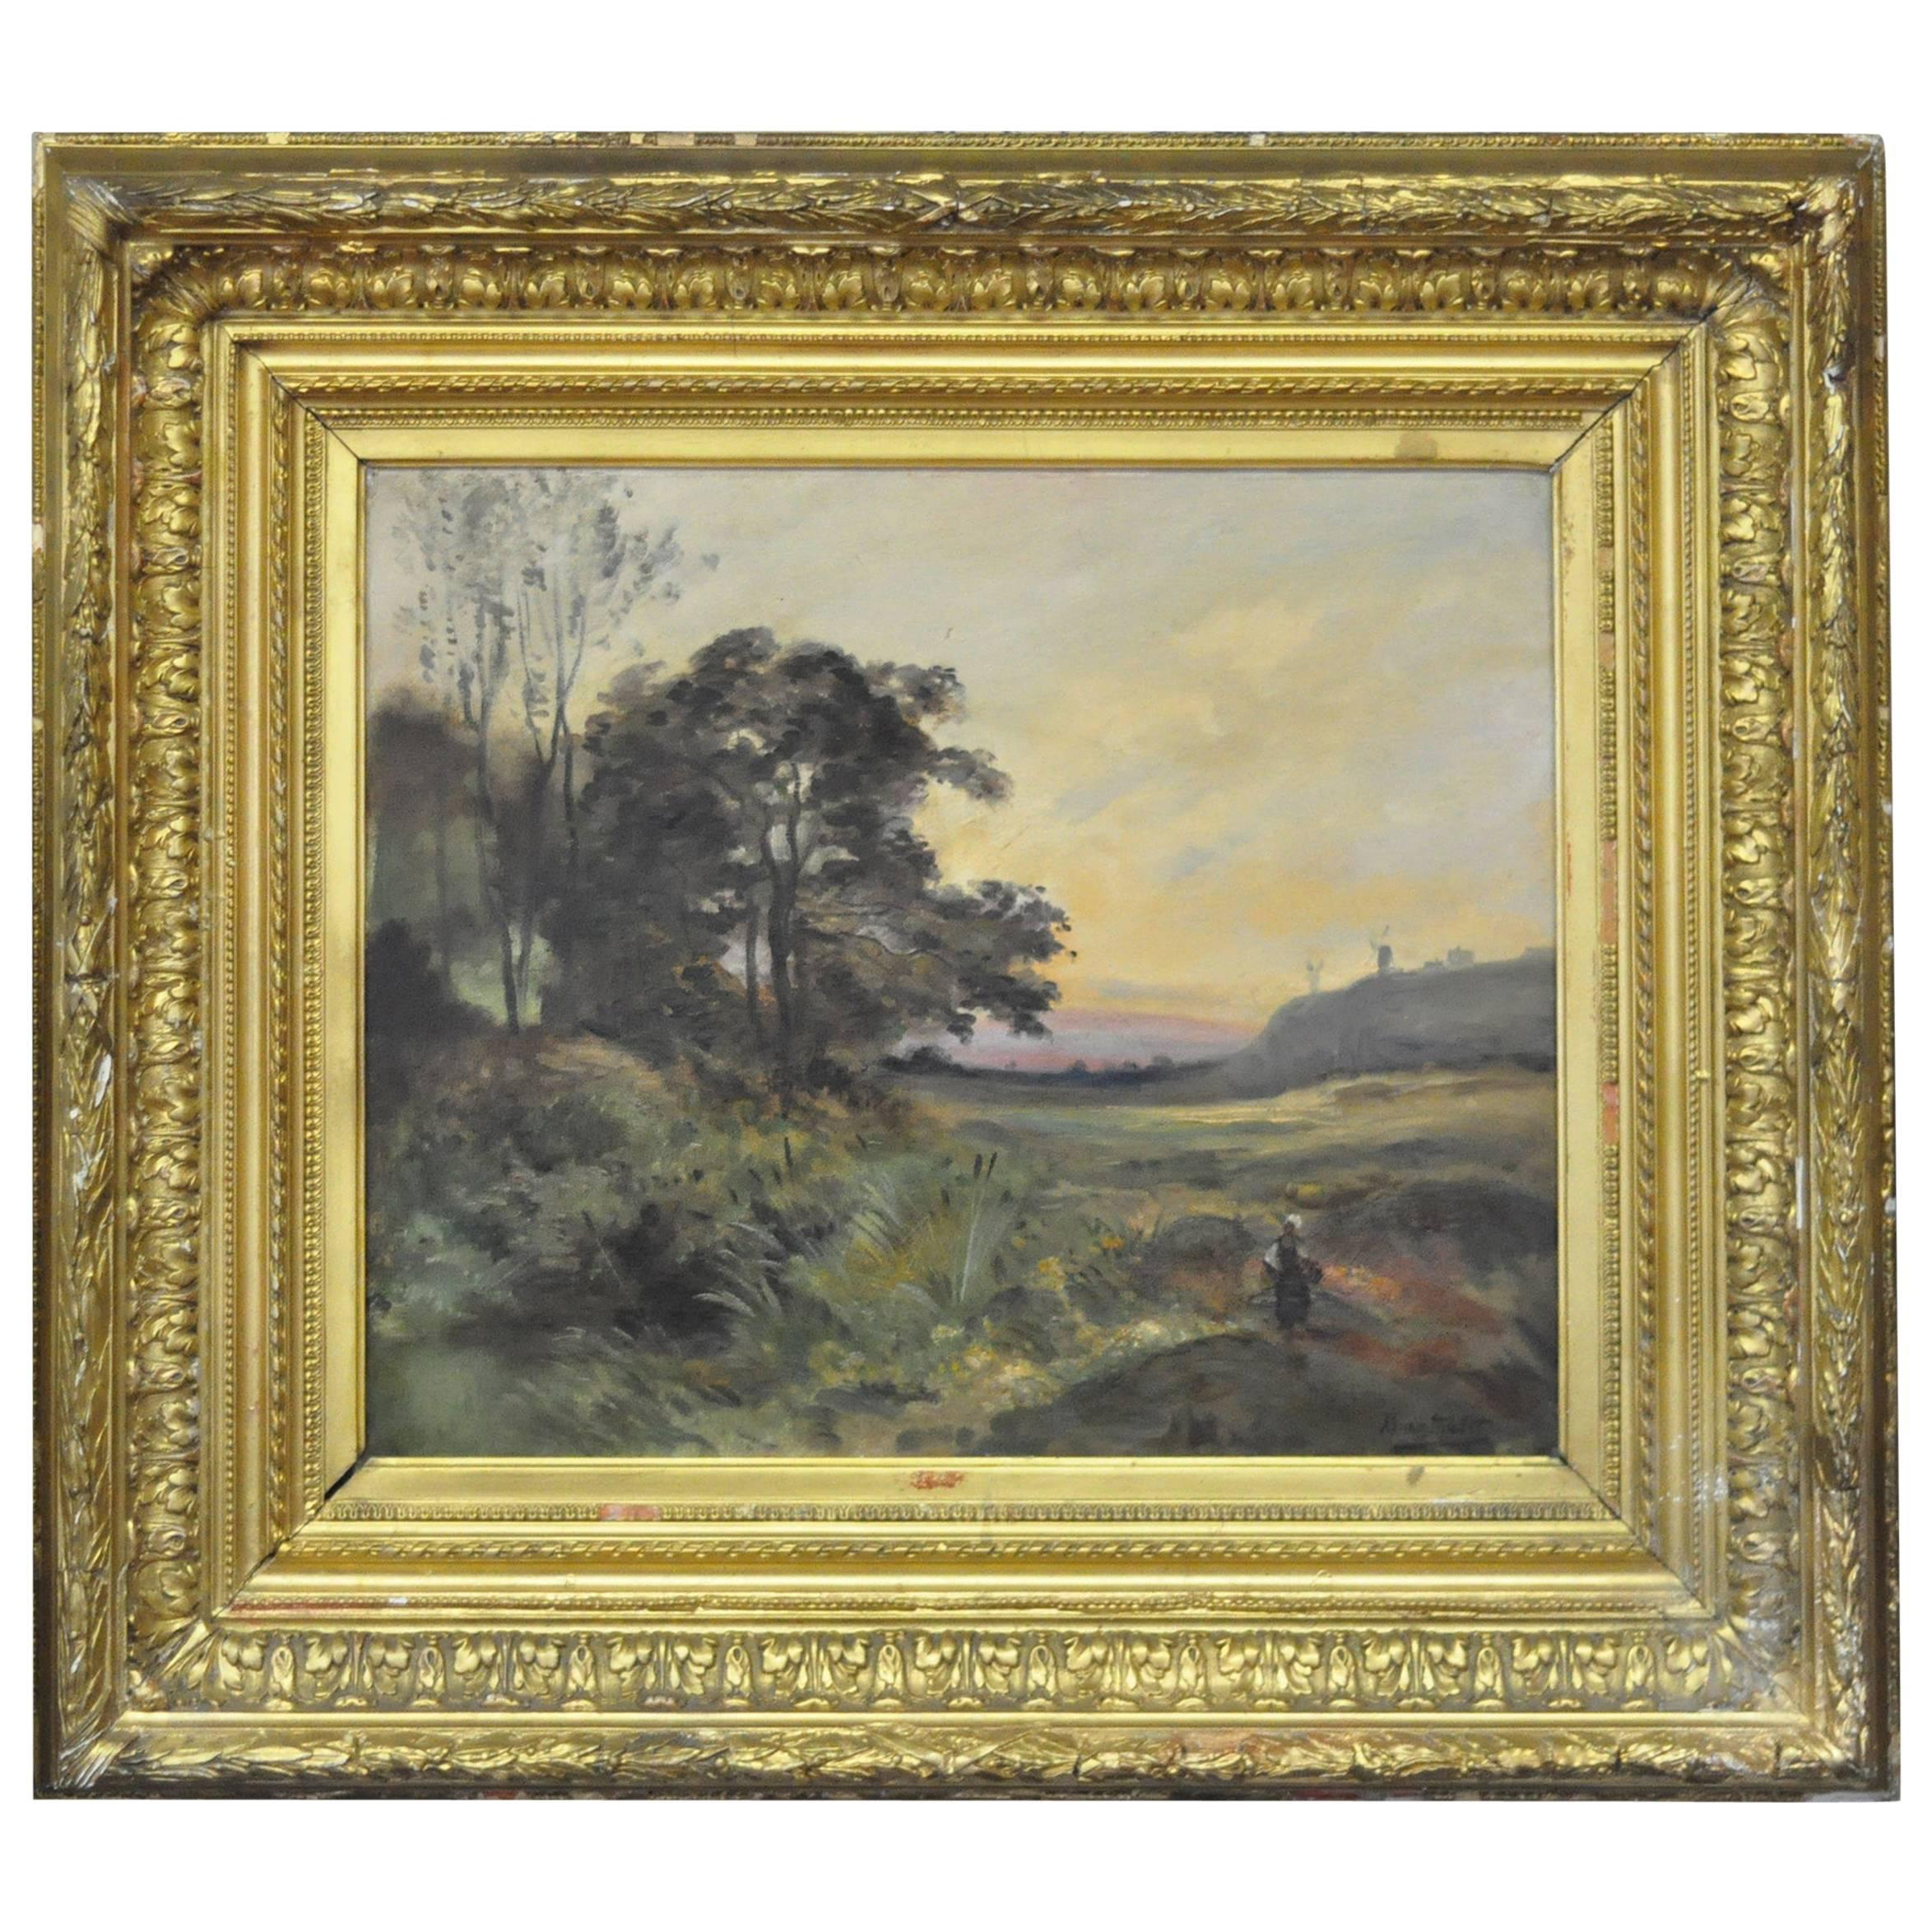 19th Century French Oil Painting Signed by Barthalot, "Paysage Anime" For Sale